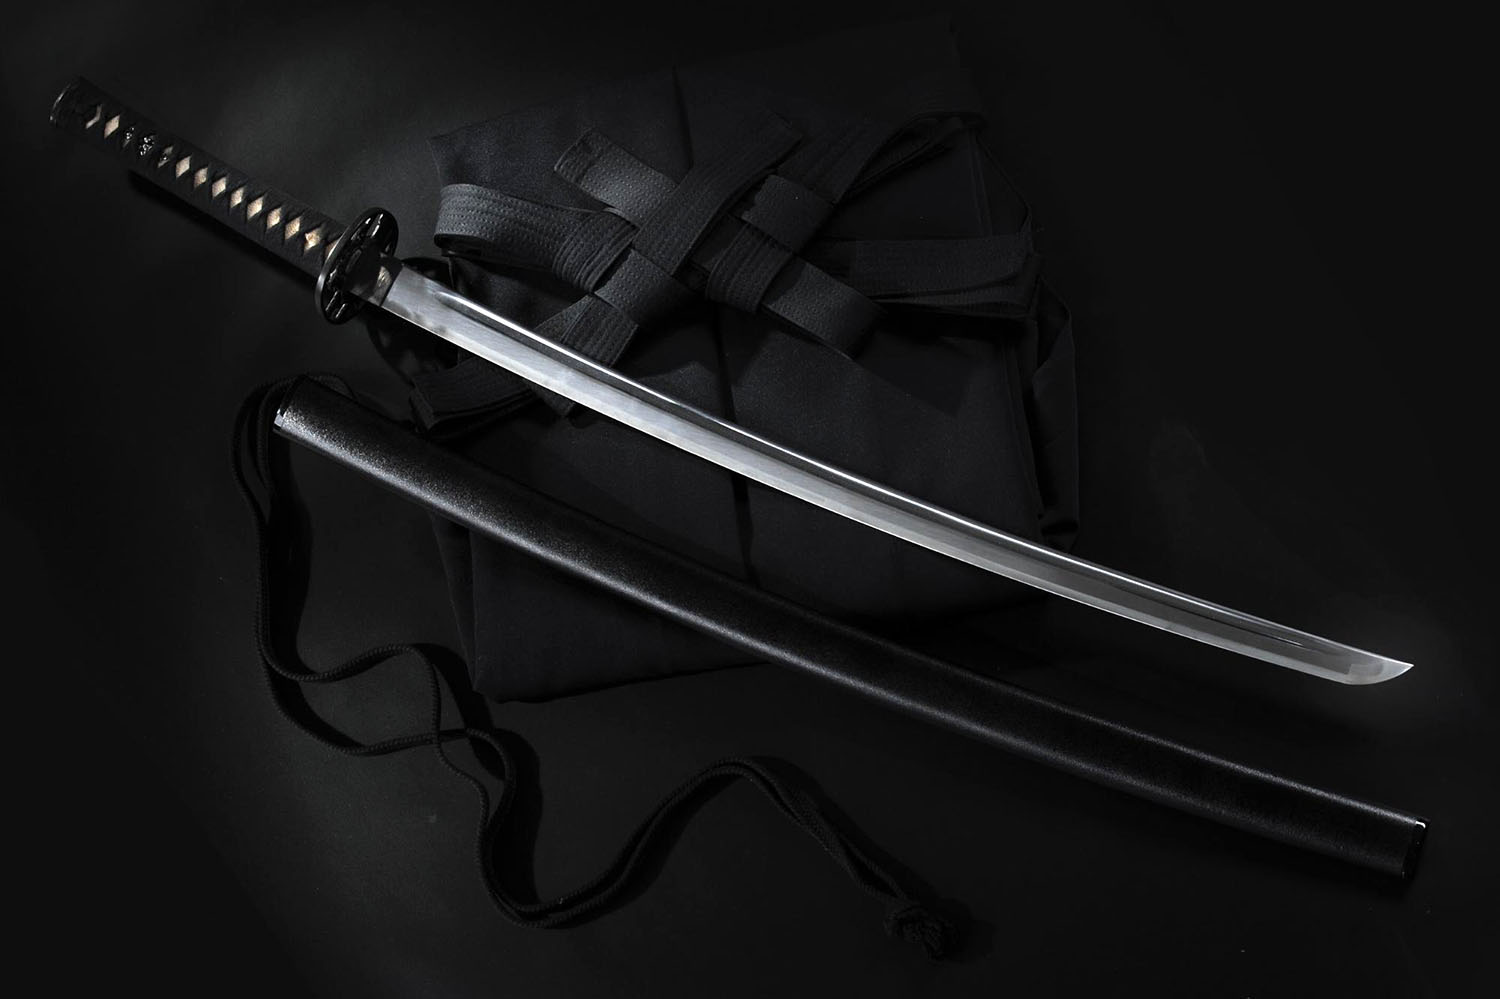 Detail Picture Of A Katana Sword Nomer 19